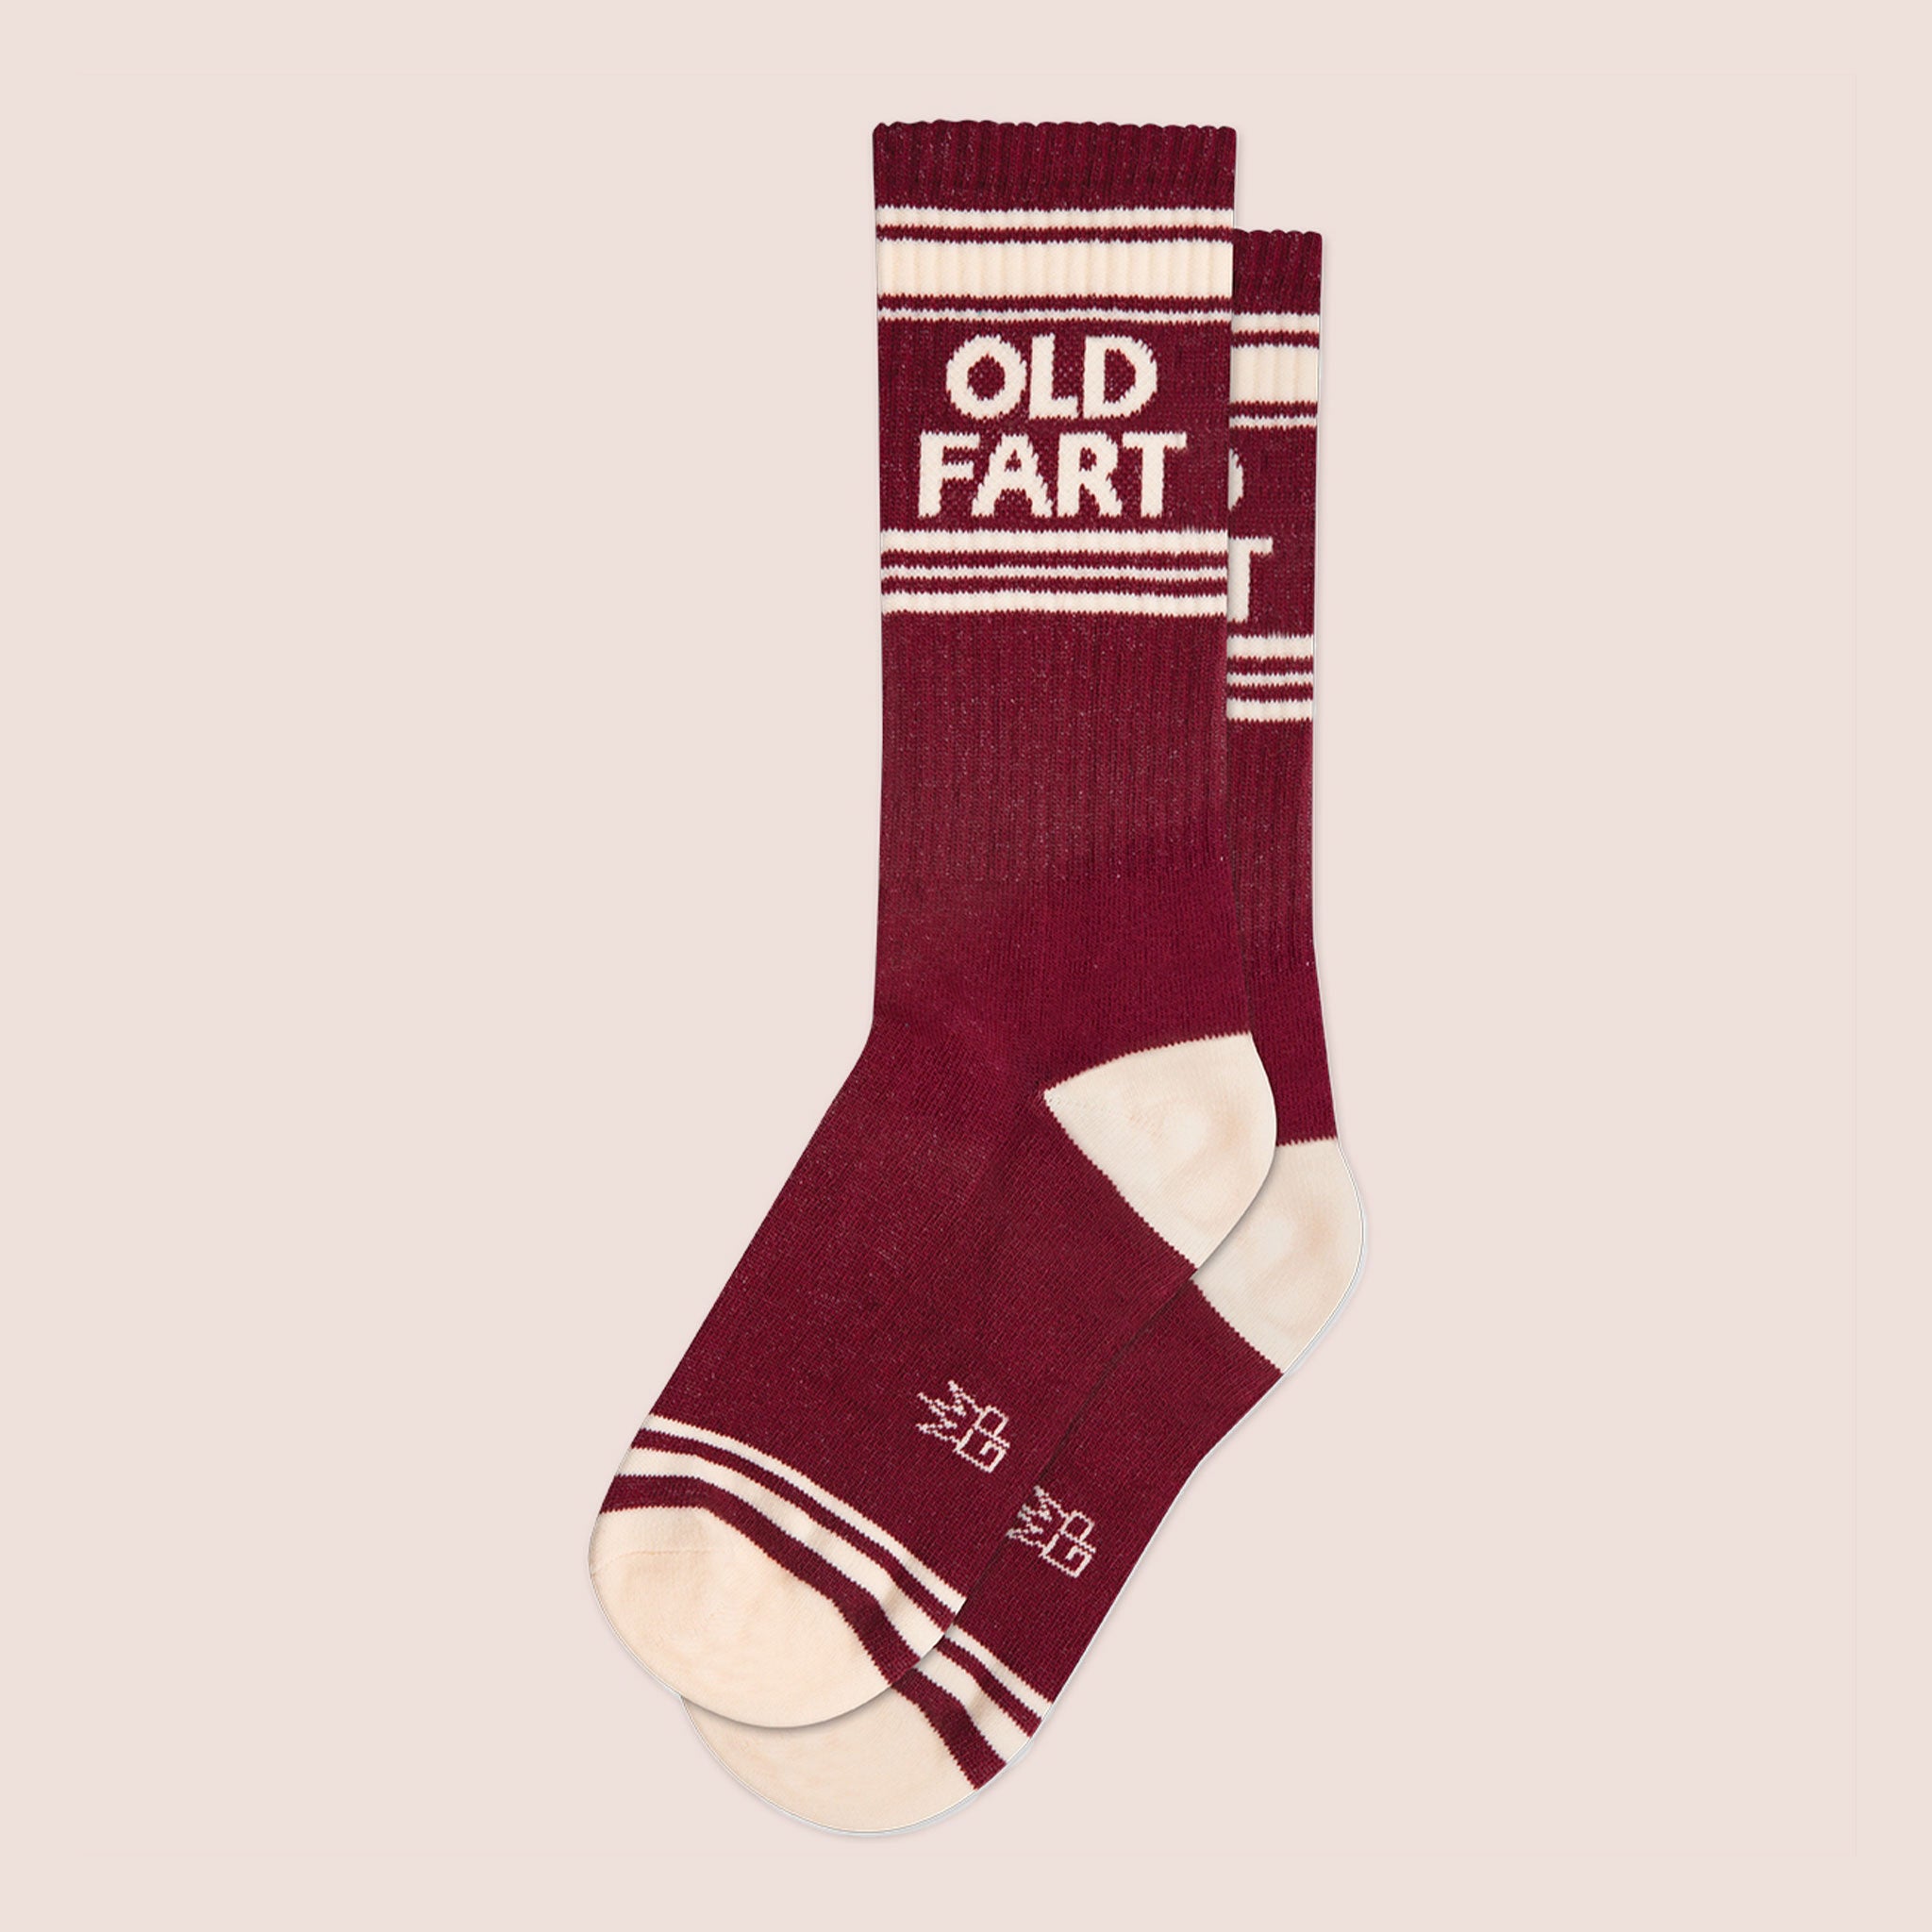 A pair of dark red socks with ivory details and text at the top that reads, "Old Fart".